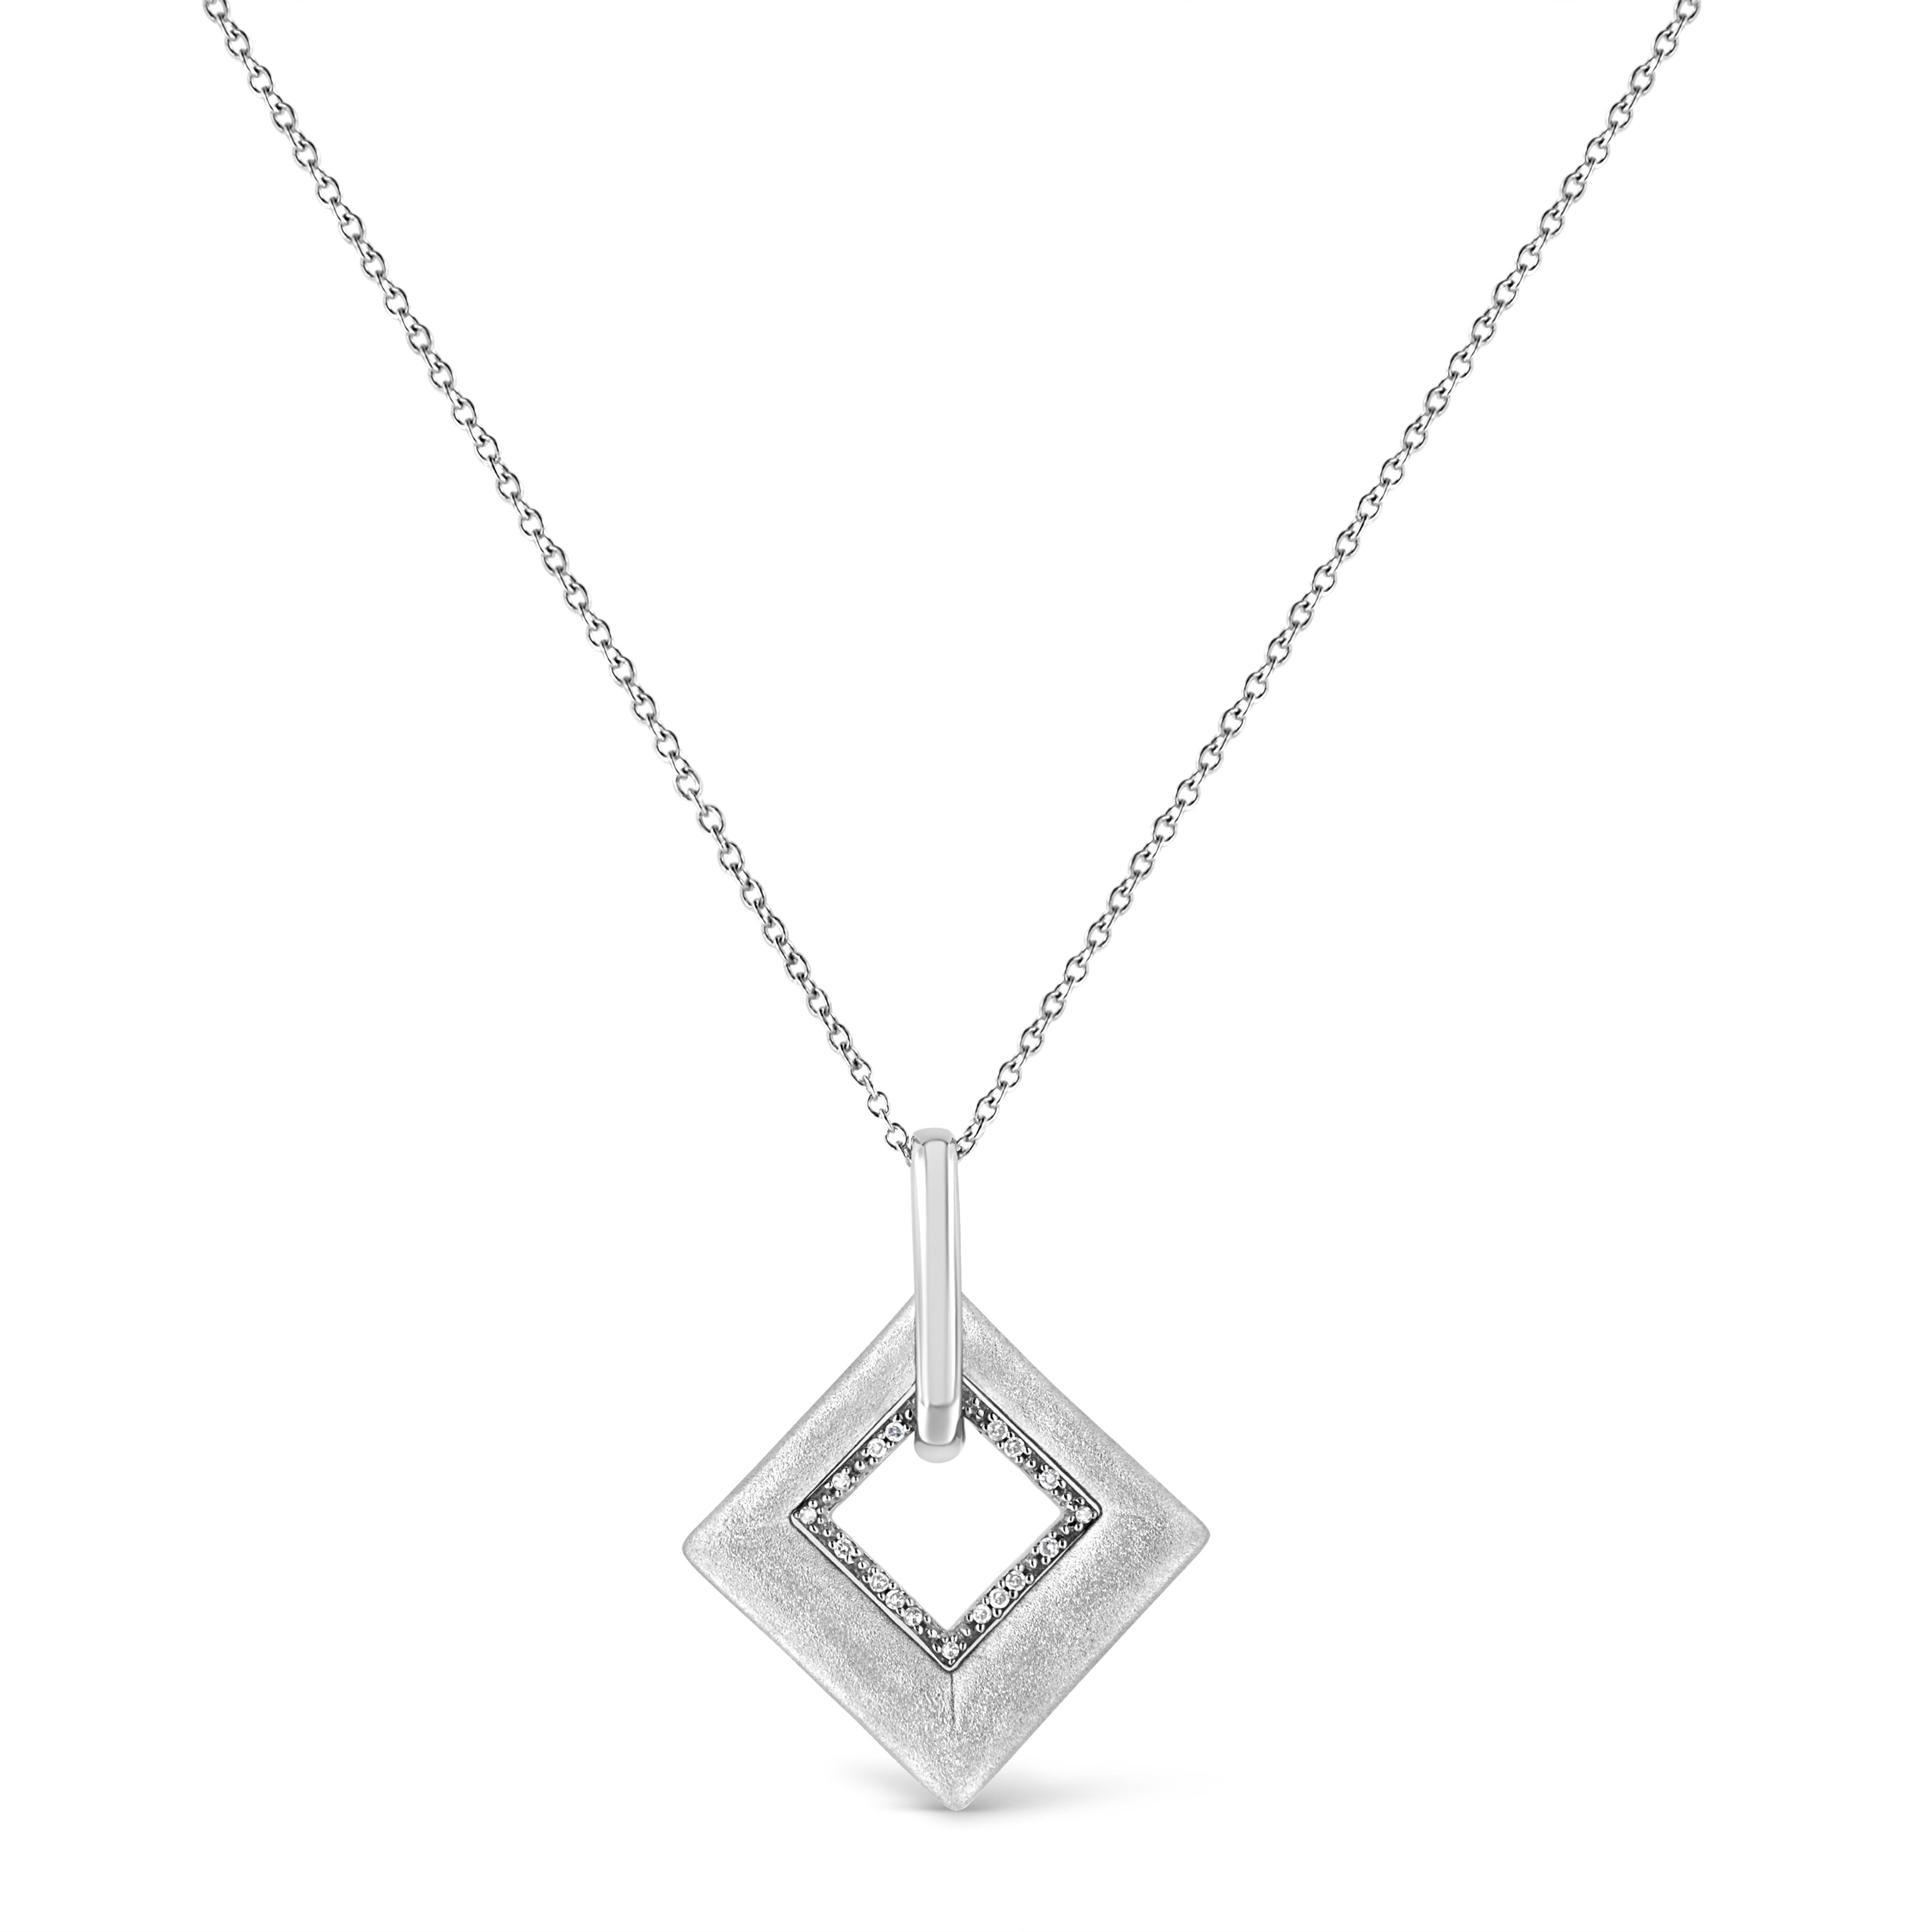 This opulent kite shape diamond pendant adds a spark of eternity to your loved ones style. Gorgeous pendant rendered perfectly on glinting sterling silver showcasing 17 sparkling pave set single cut diamonds, set on kite motif and dangles from a